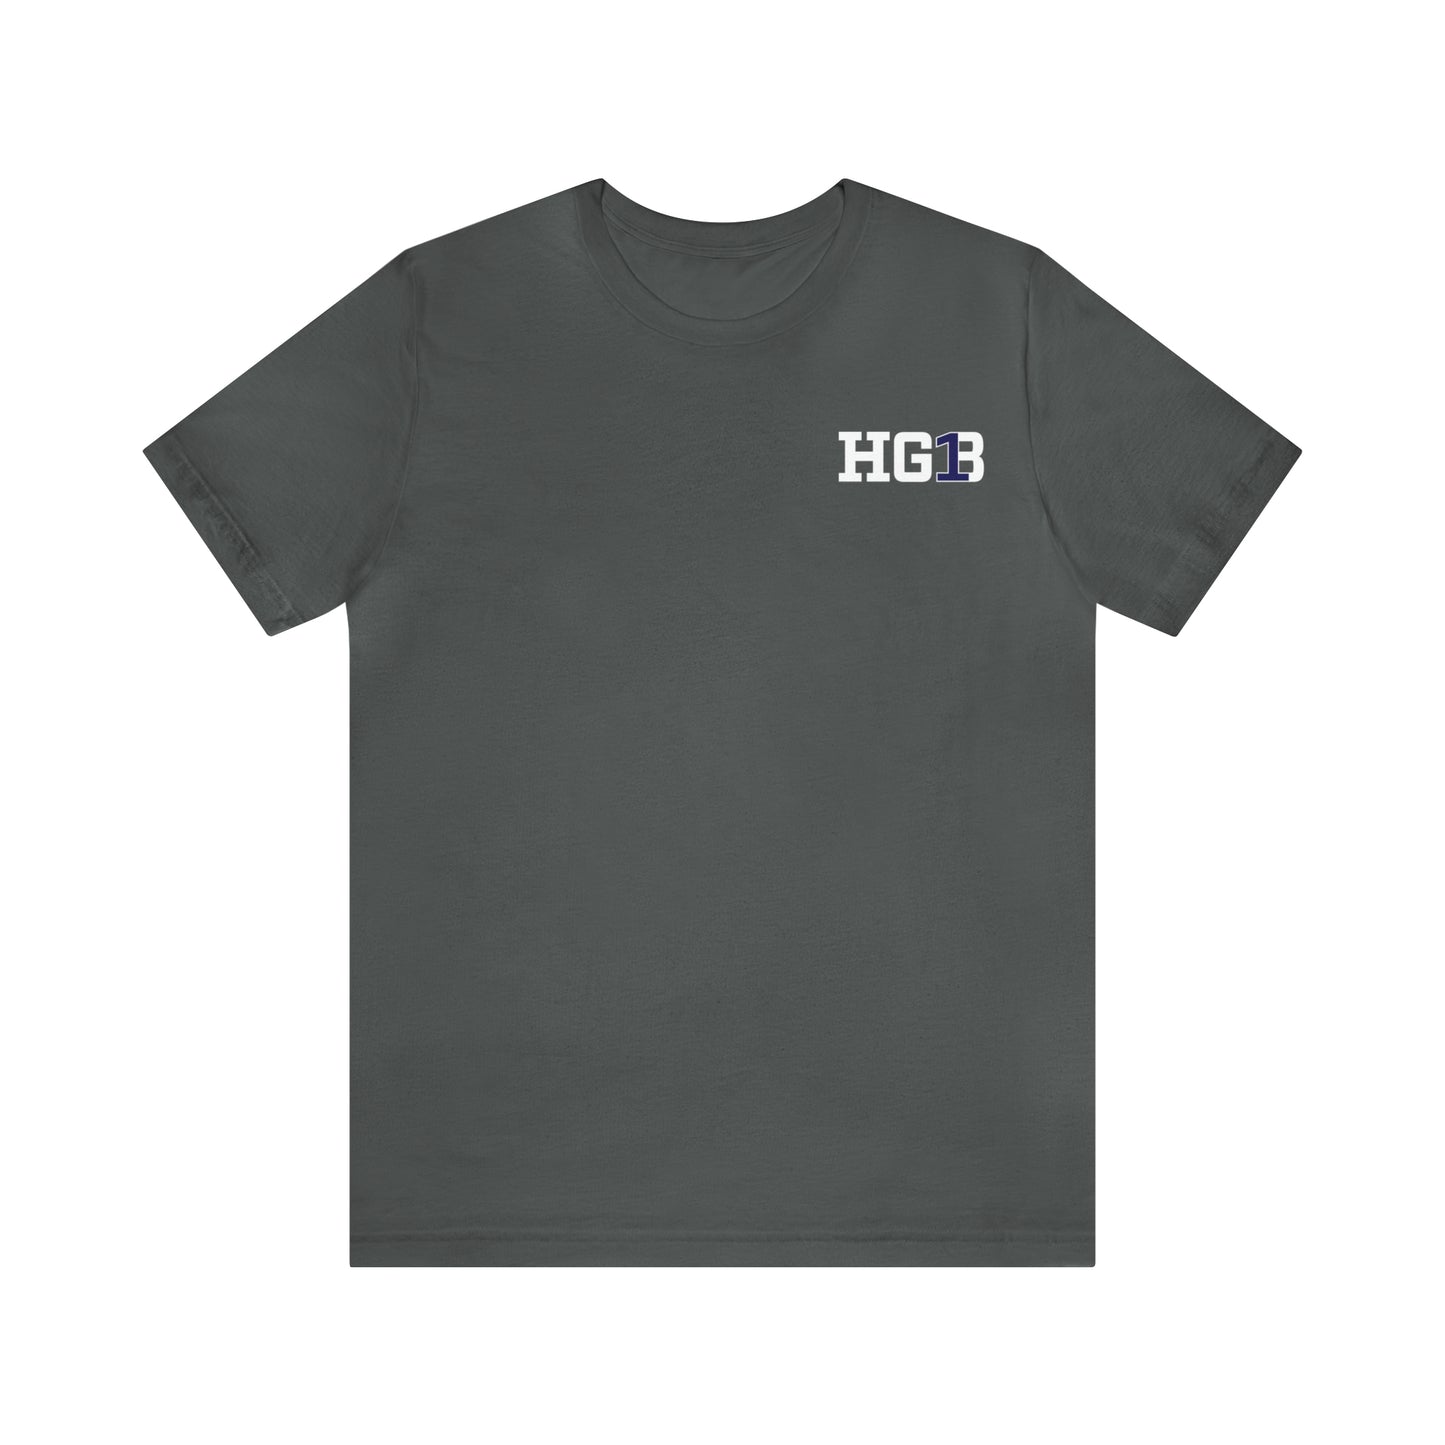 Hope Briggs: Different Tee